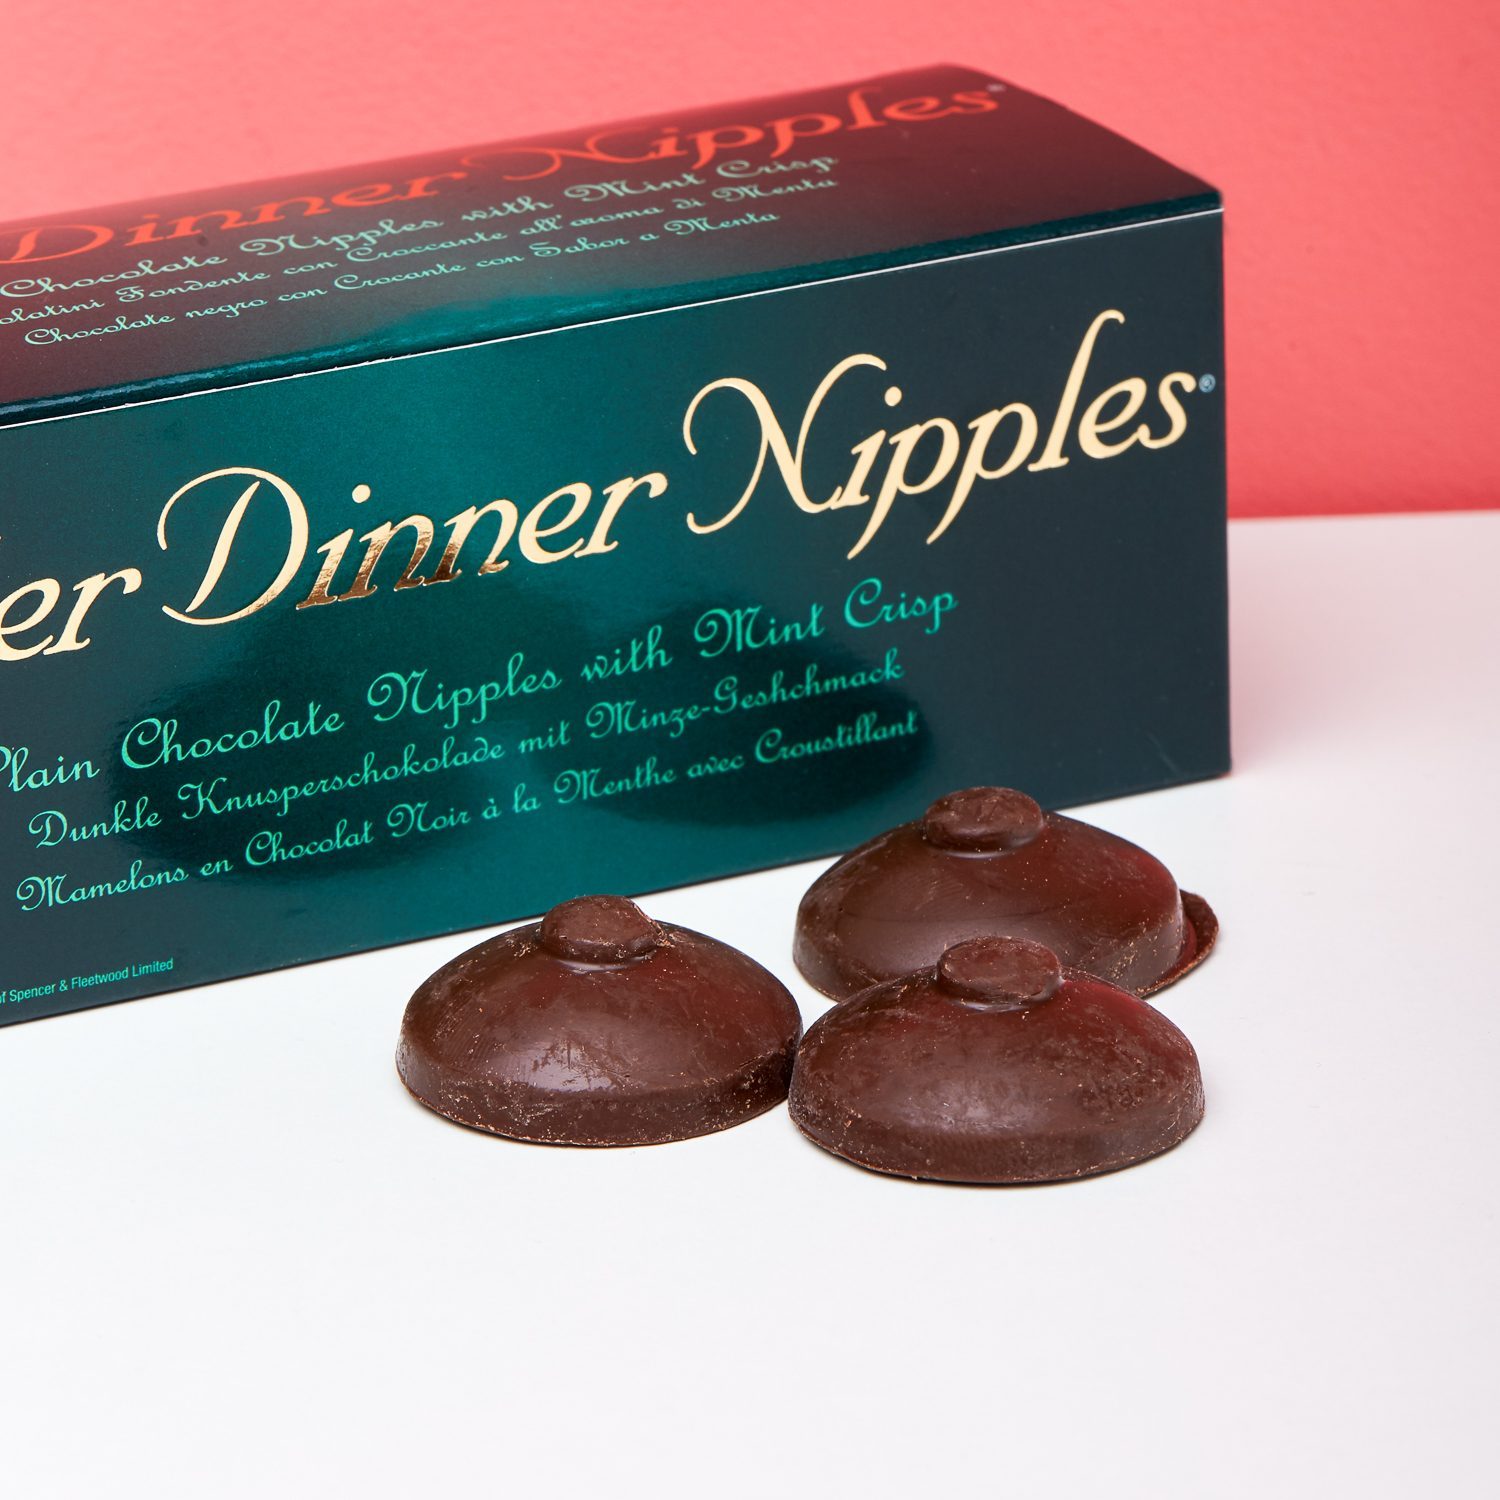 After Dinner Nipples